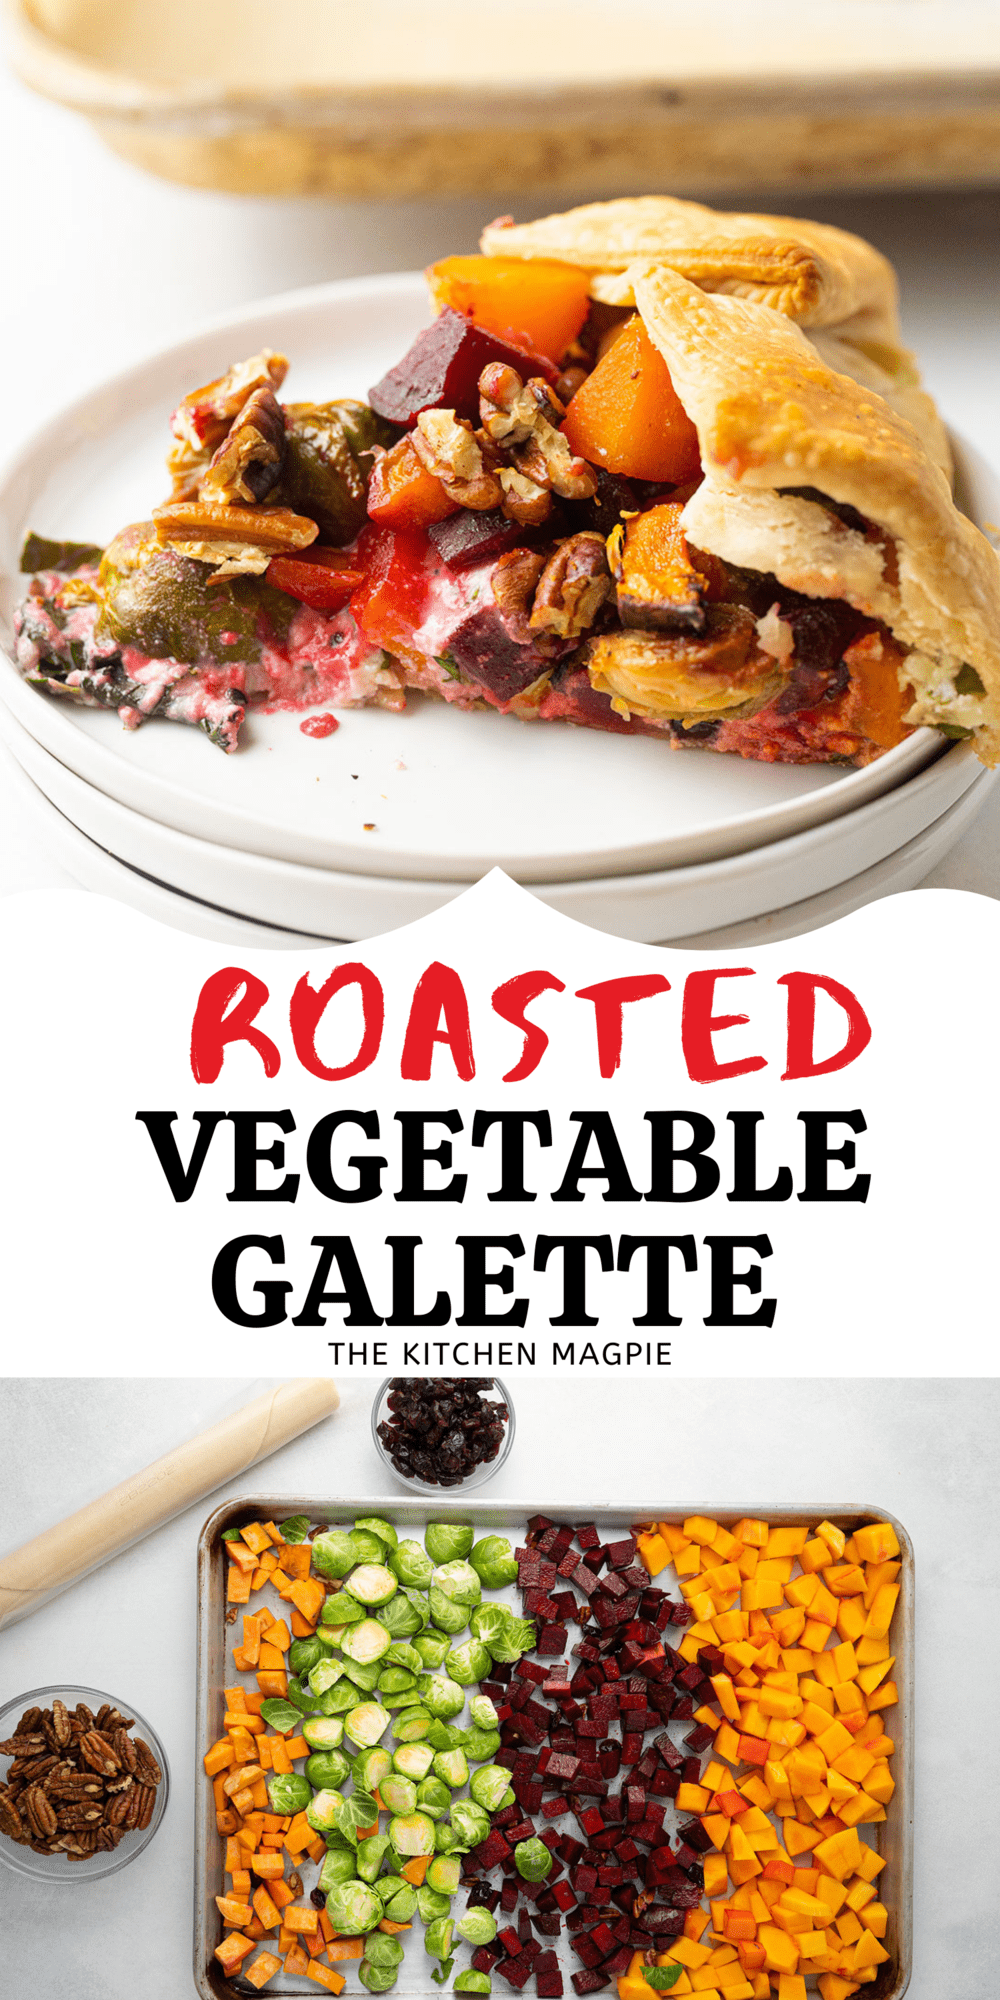 This savory galette is loaded with roasted vegetables, dried cranberries for a sweet pop and a garlic ricotta cheese!